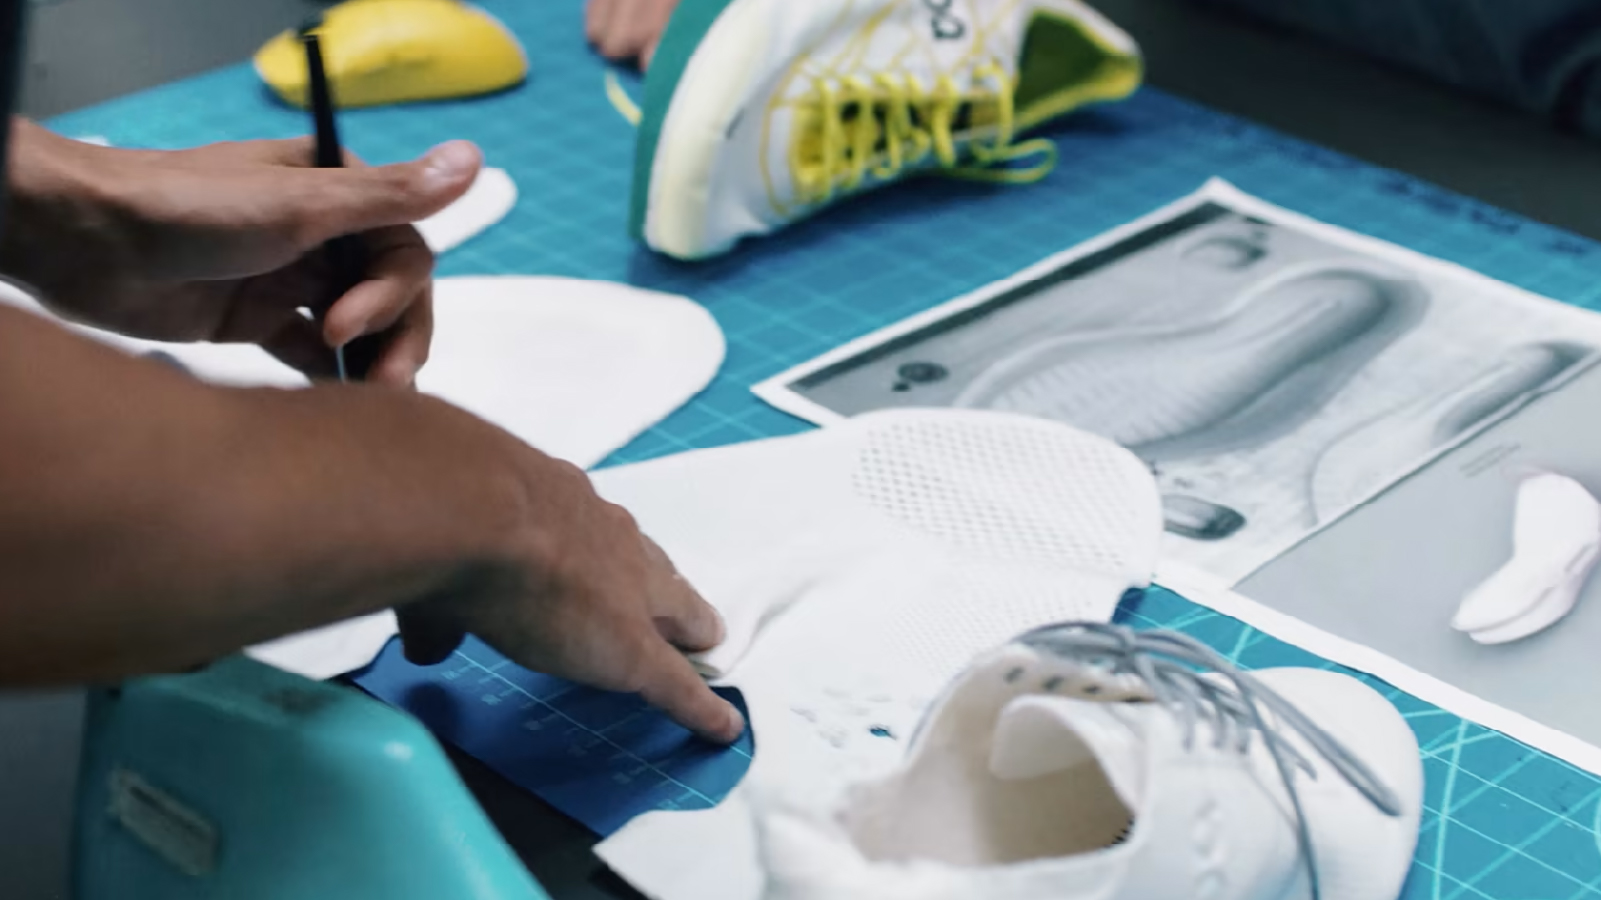 An image of someone designing a shoe